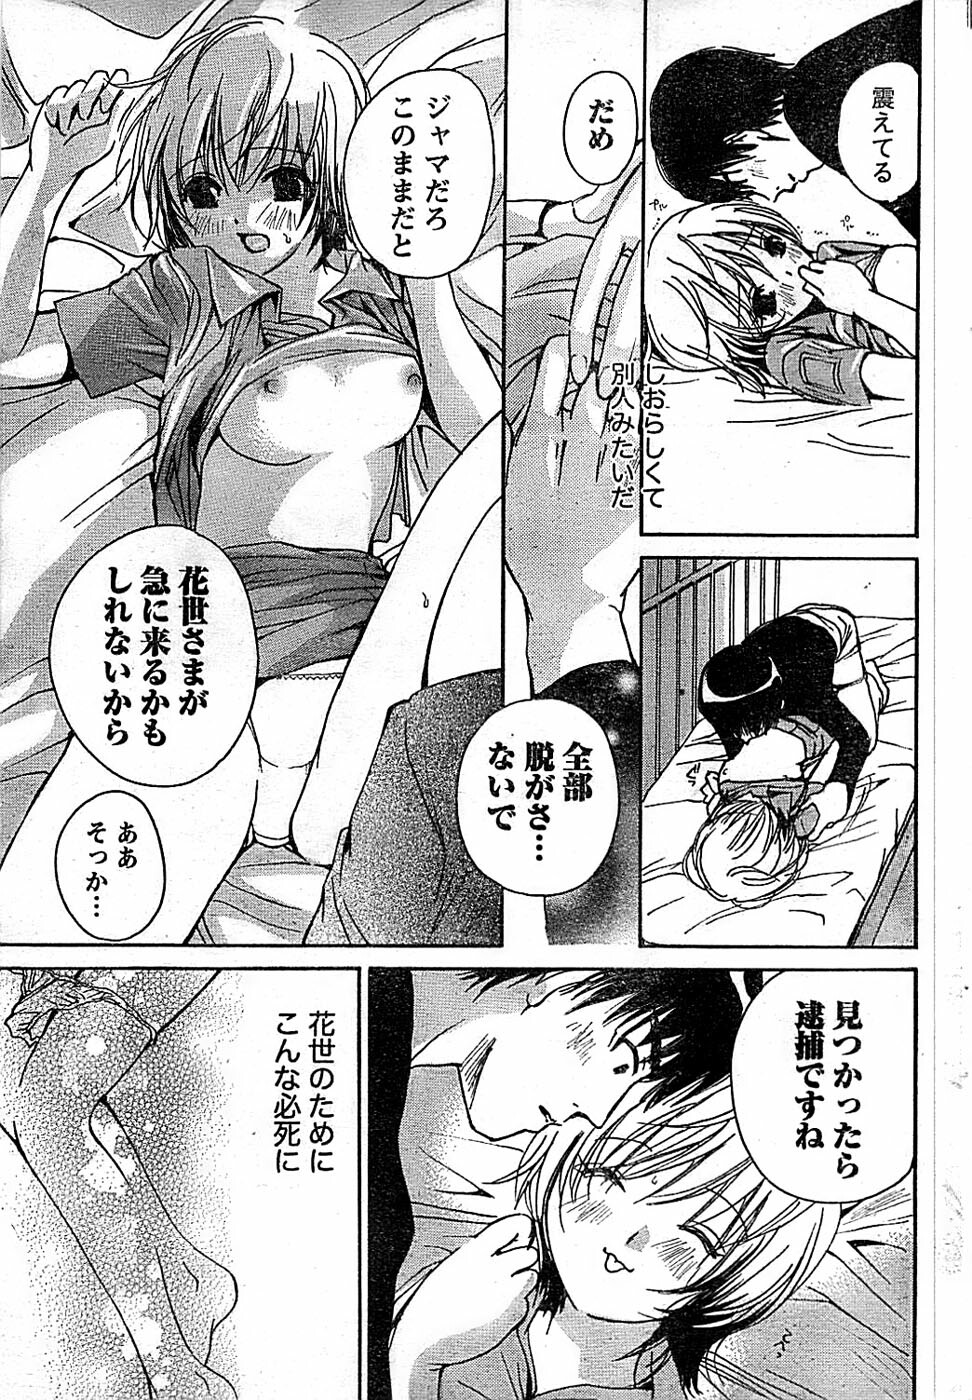 Doki! Special 2008-01 page 51 full